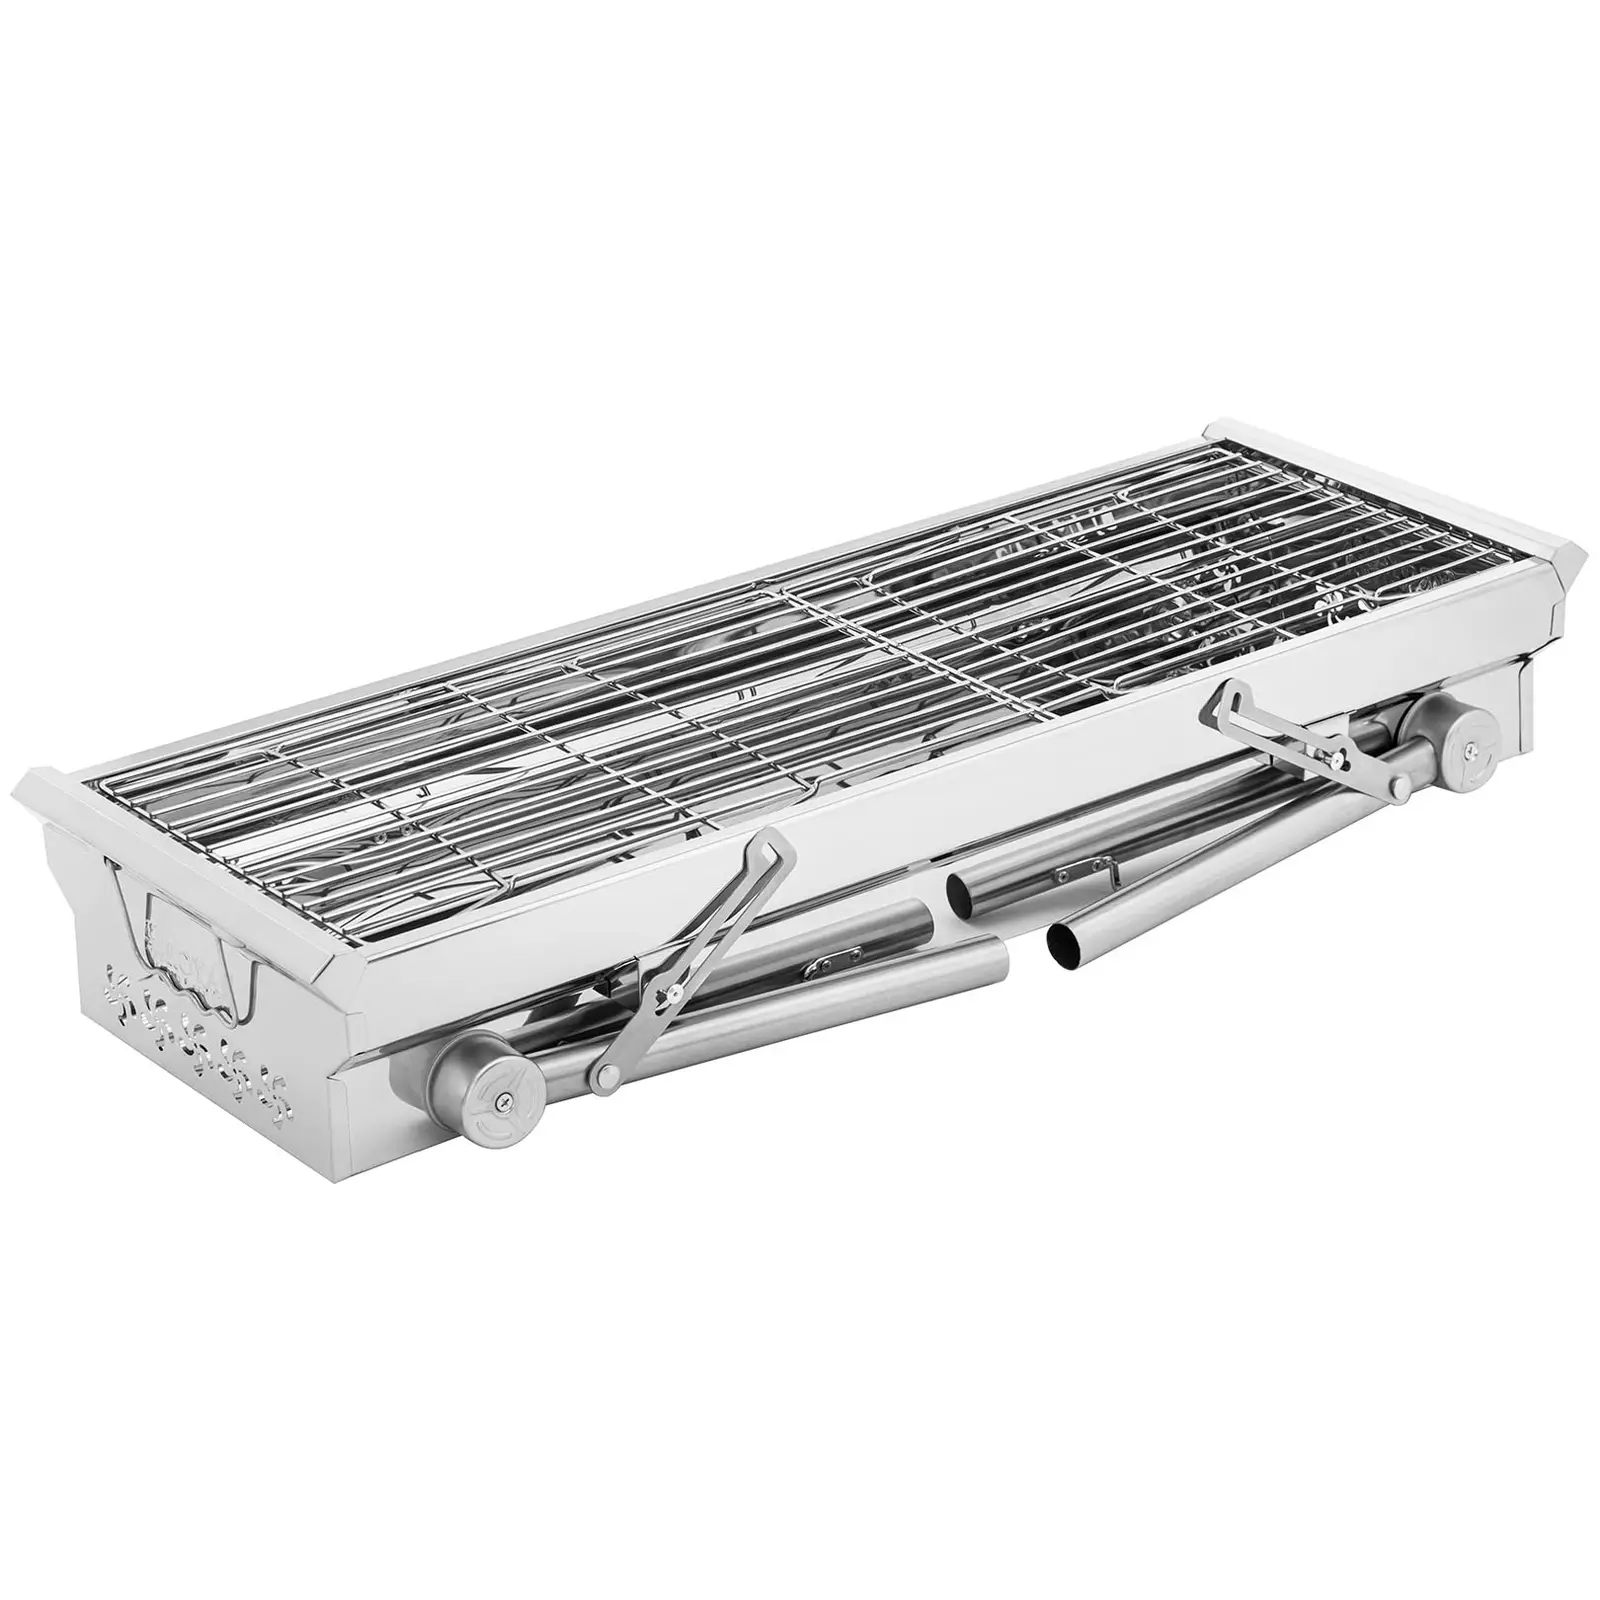 Charcoal grill - with folding grill - 43 x 25 cm - stainless steel / galvanised steel - Royal Catering